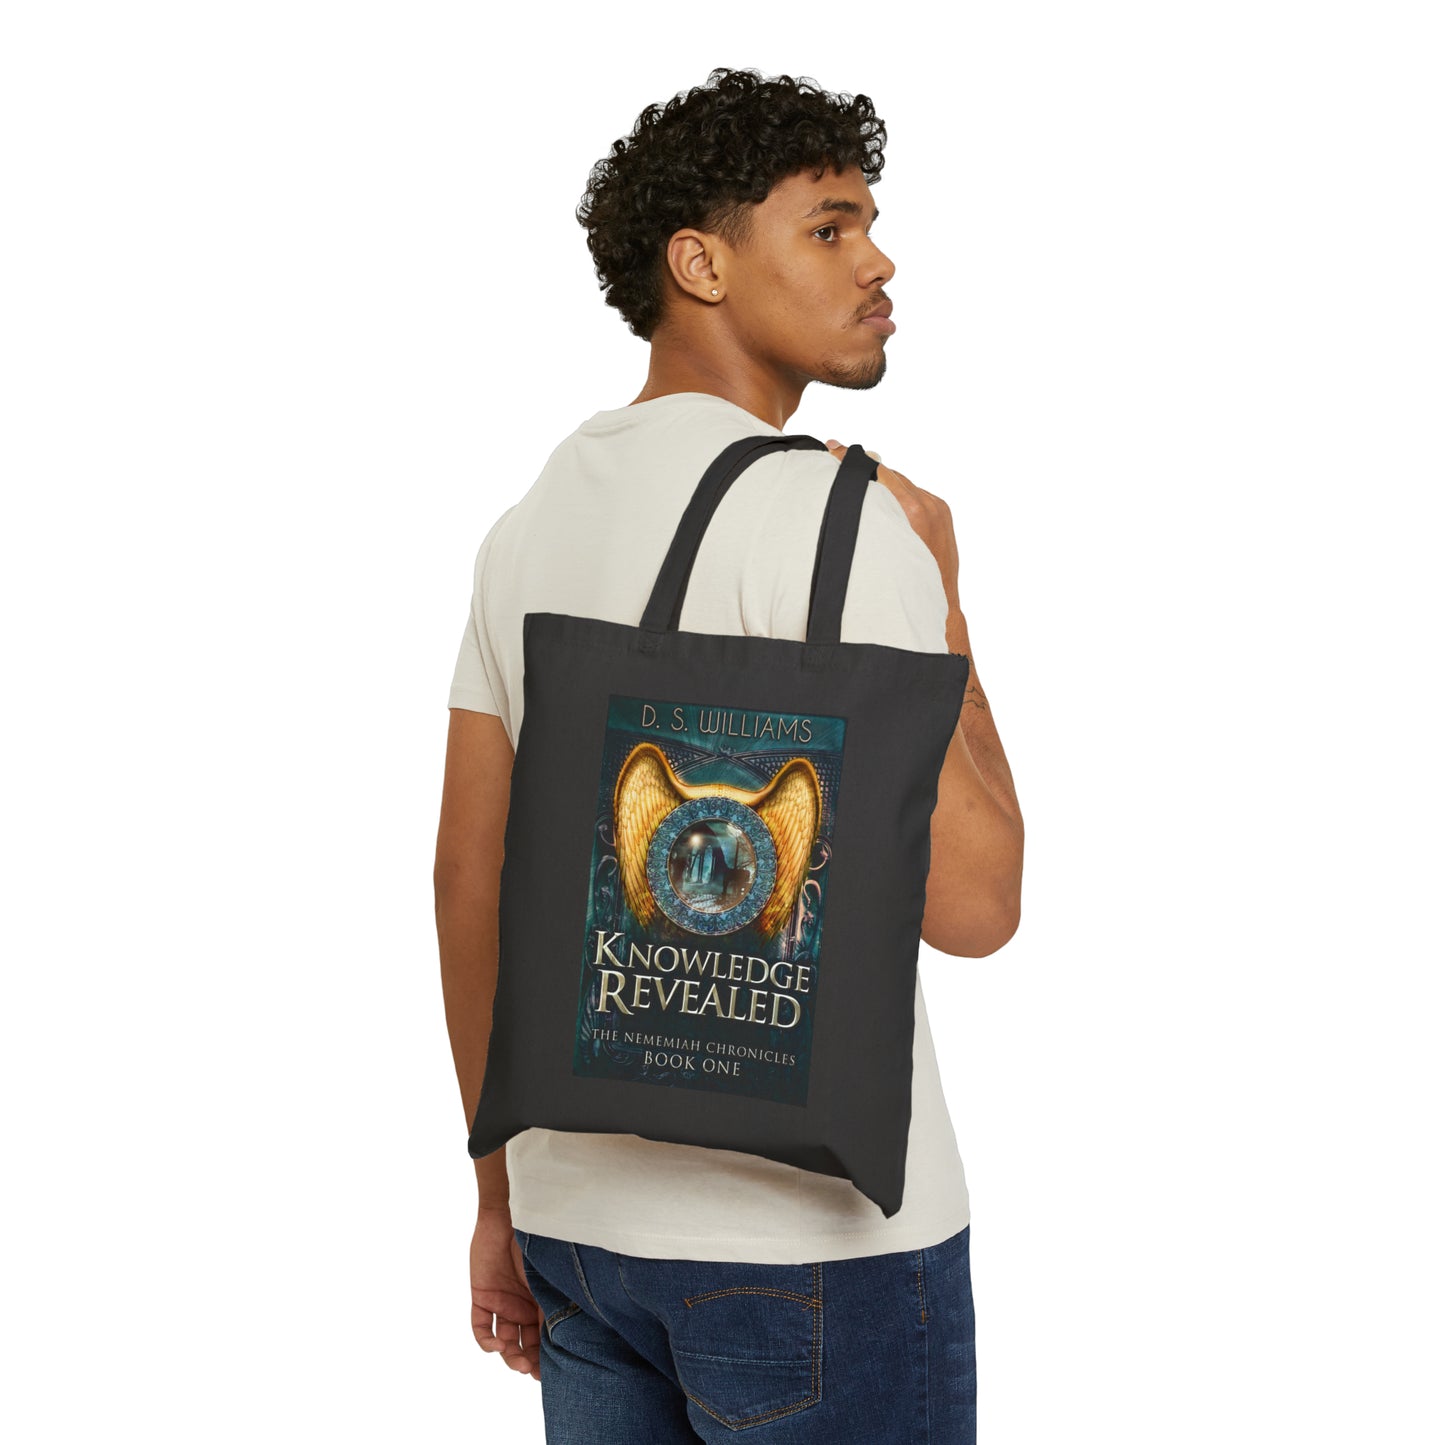 Knowledge Revealed - Cotton Canvas Tote Bag